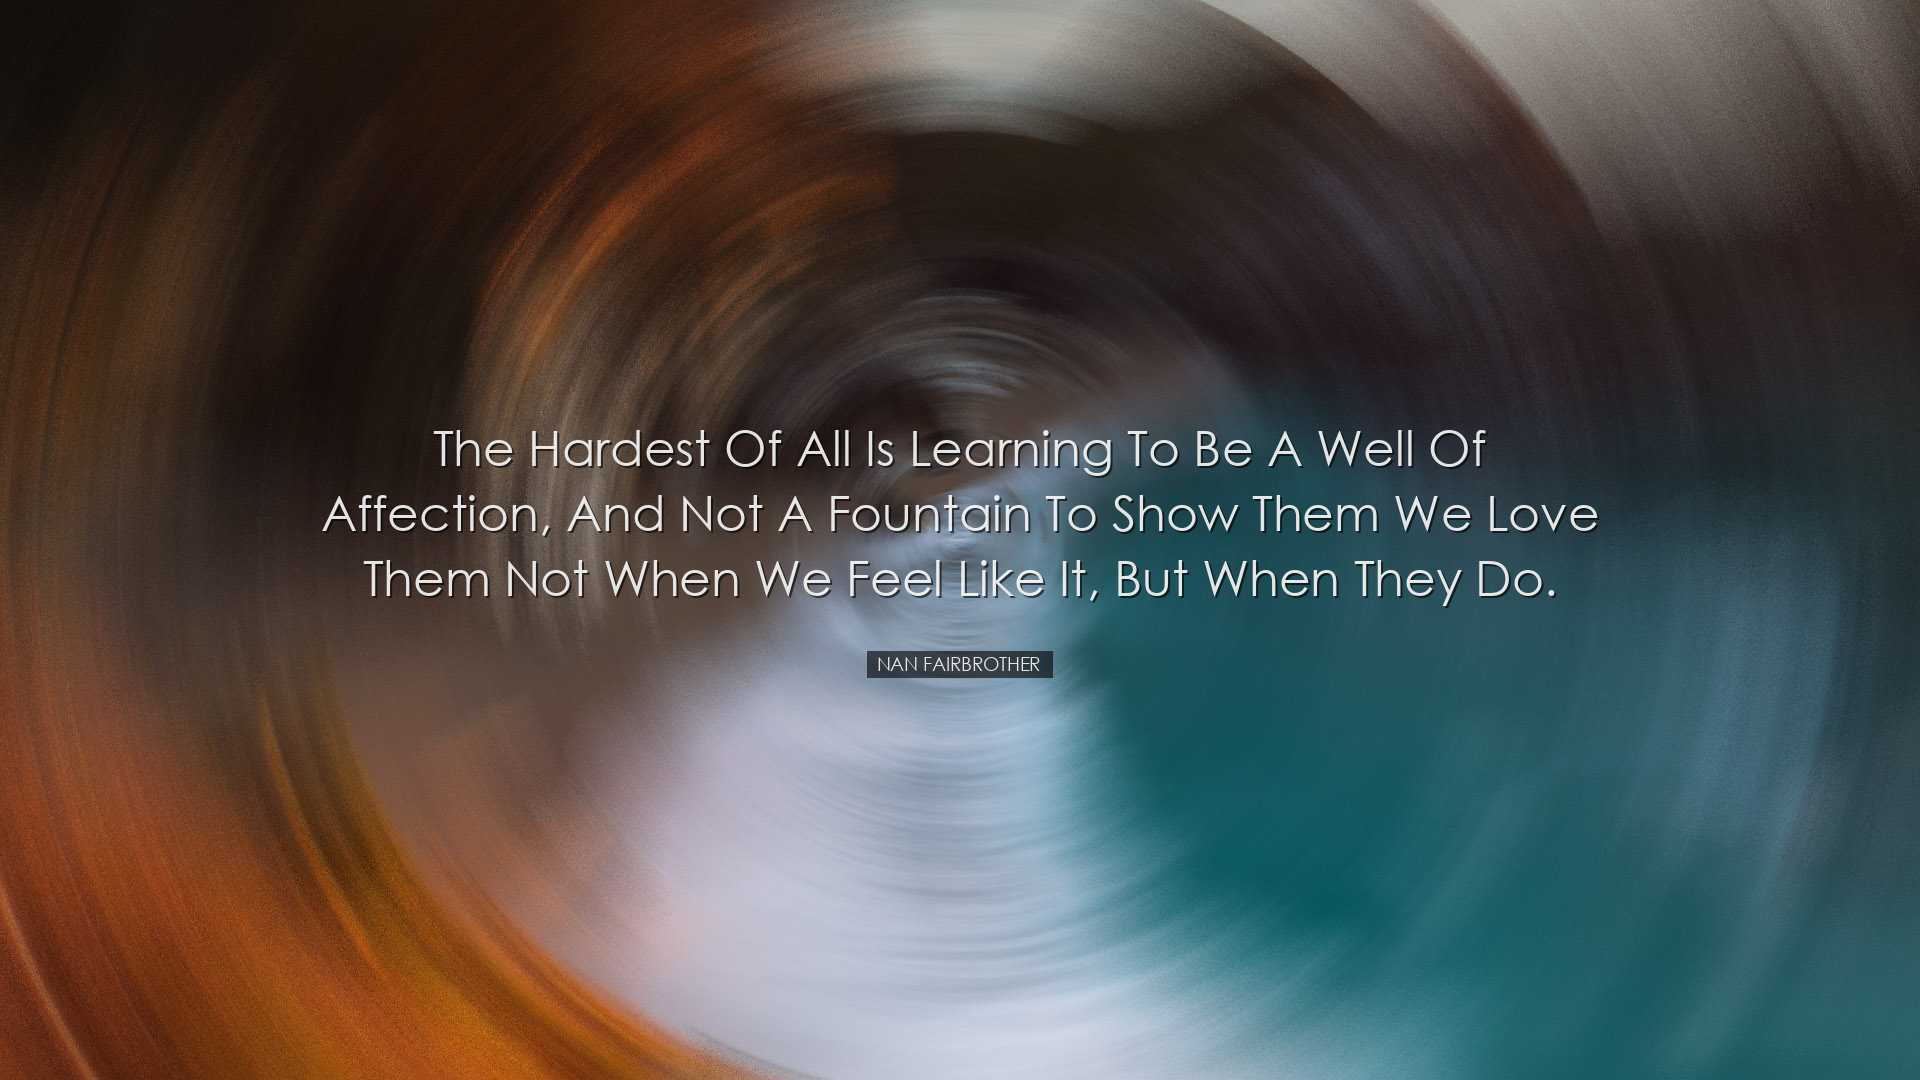 The hardest of all is learning to be a well of affection, and not